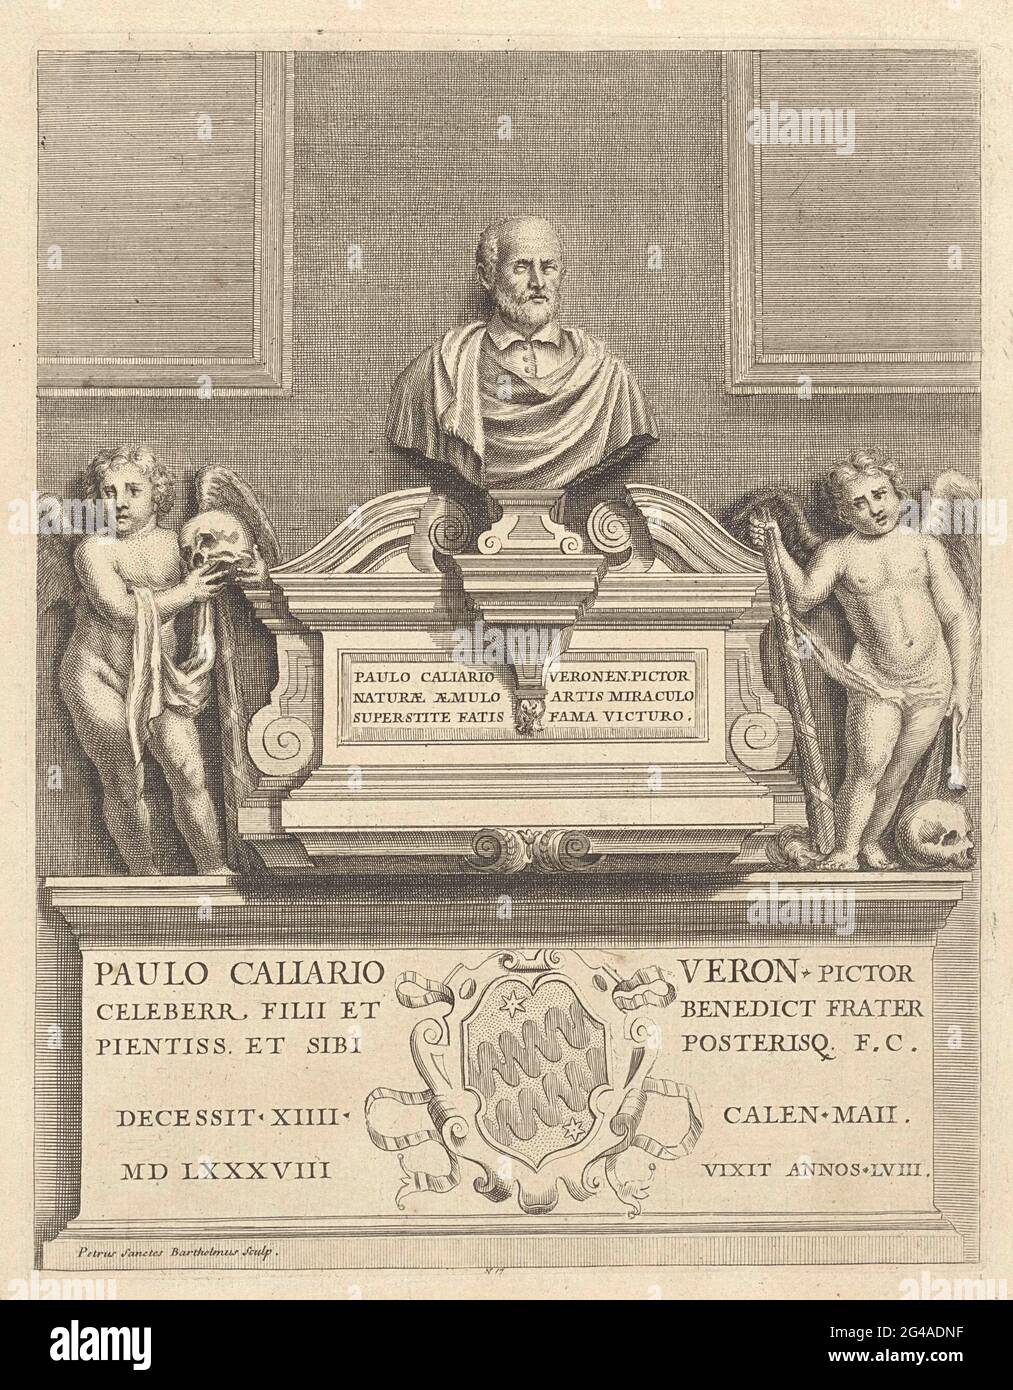 Tomb of Paolo Veronese. Tomb of painter Paolo Veronese with portrait and two putti. In sub-margin text and a coat of arms. Stock Photo